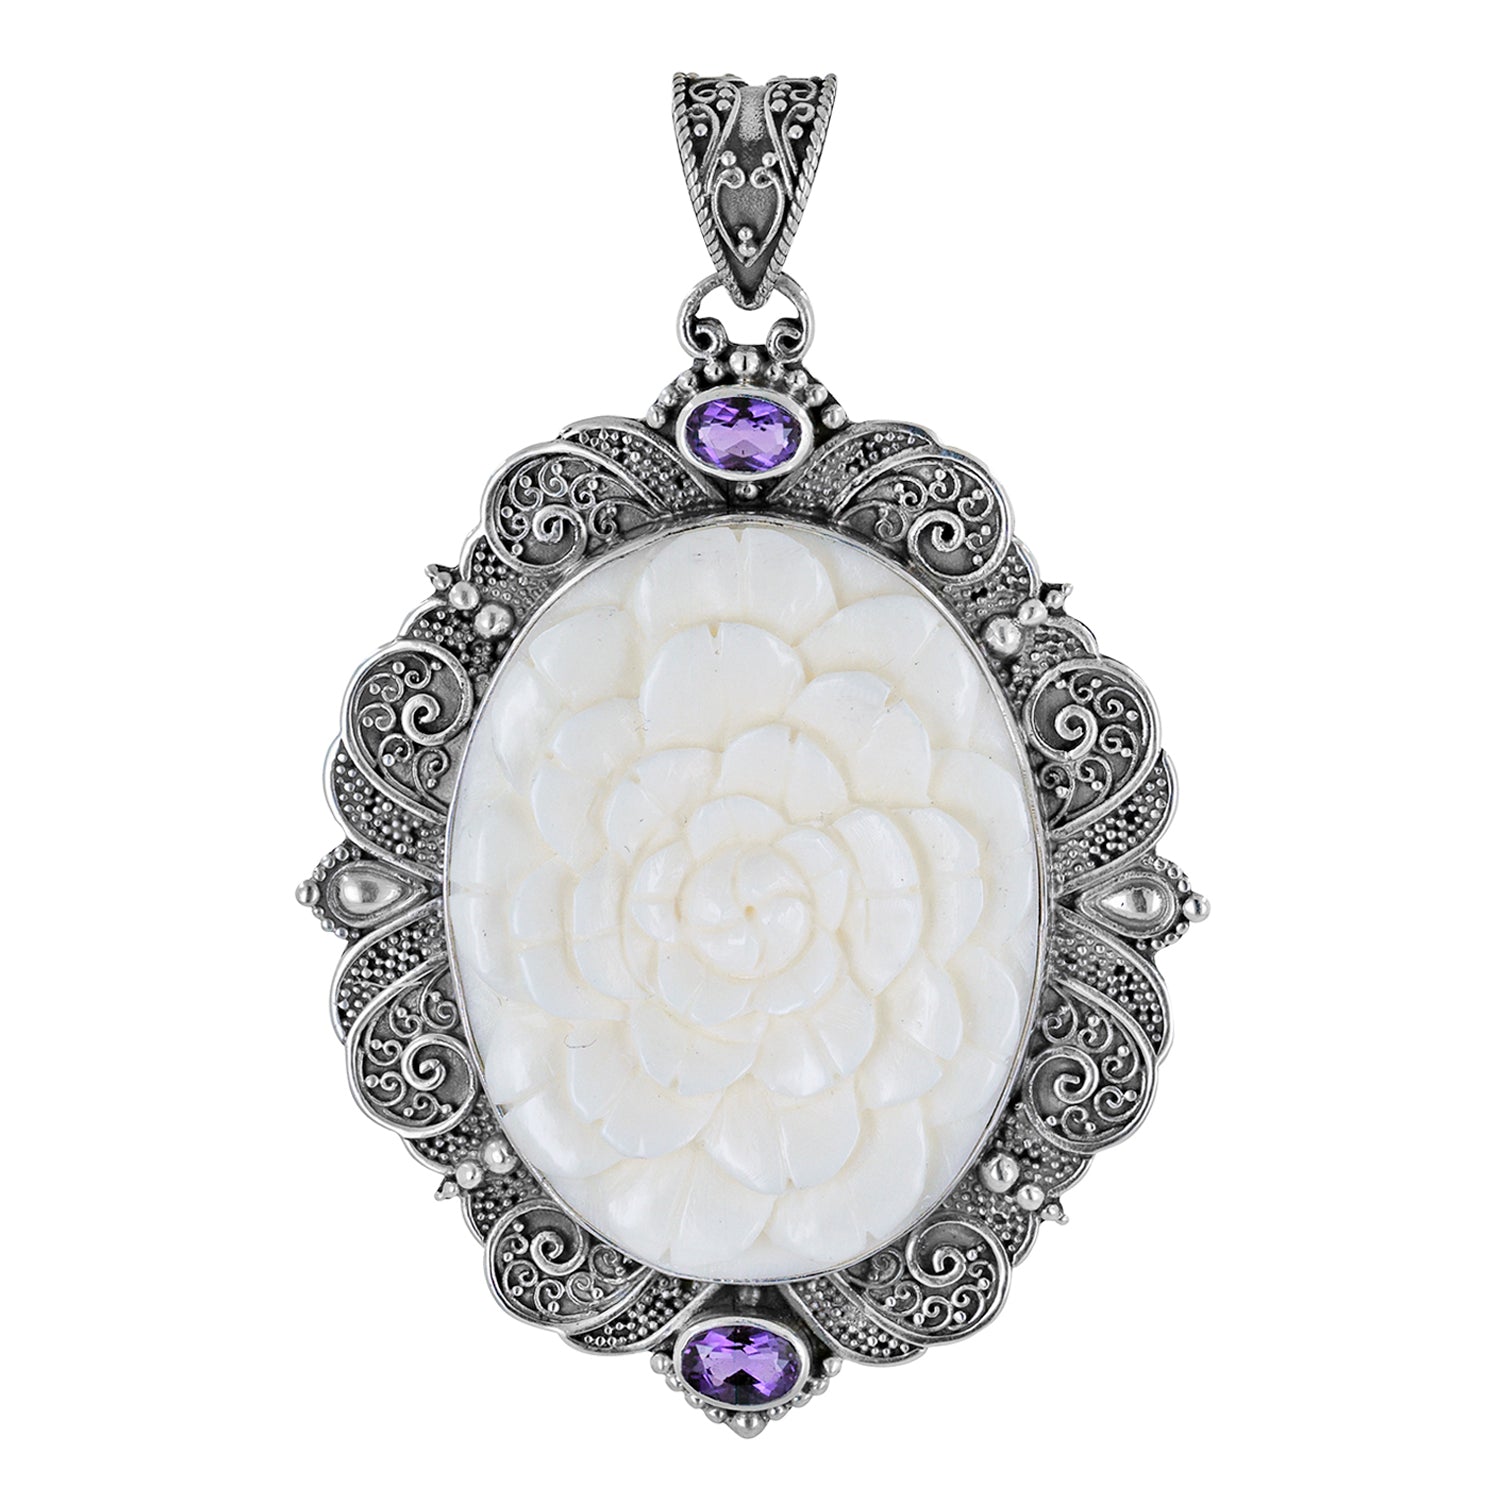 Bali Sterling Silver Floral Bone Carving Filigree Pendant with Amethyst Accents